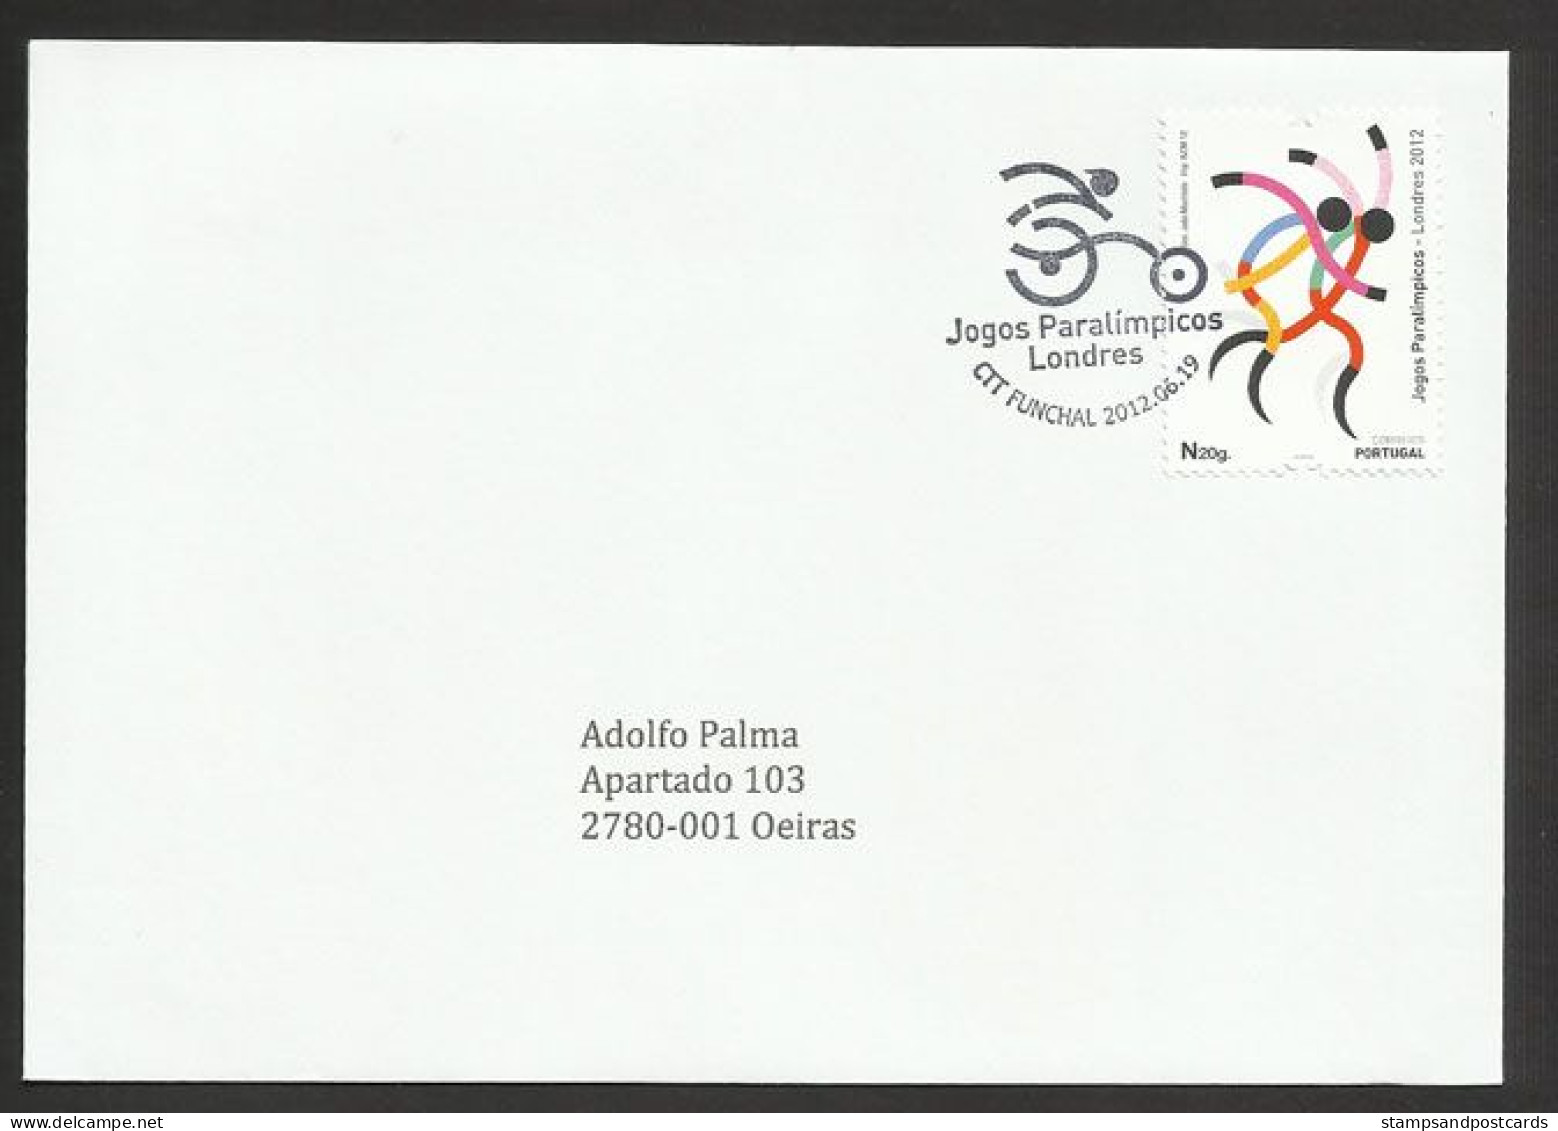 Portugal Jeux Paralympiques London 2012 FDC Cachet Madère Paralympic Games FDC Madeira Postmark - Verano 2012: Londres